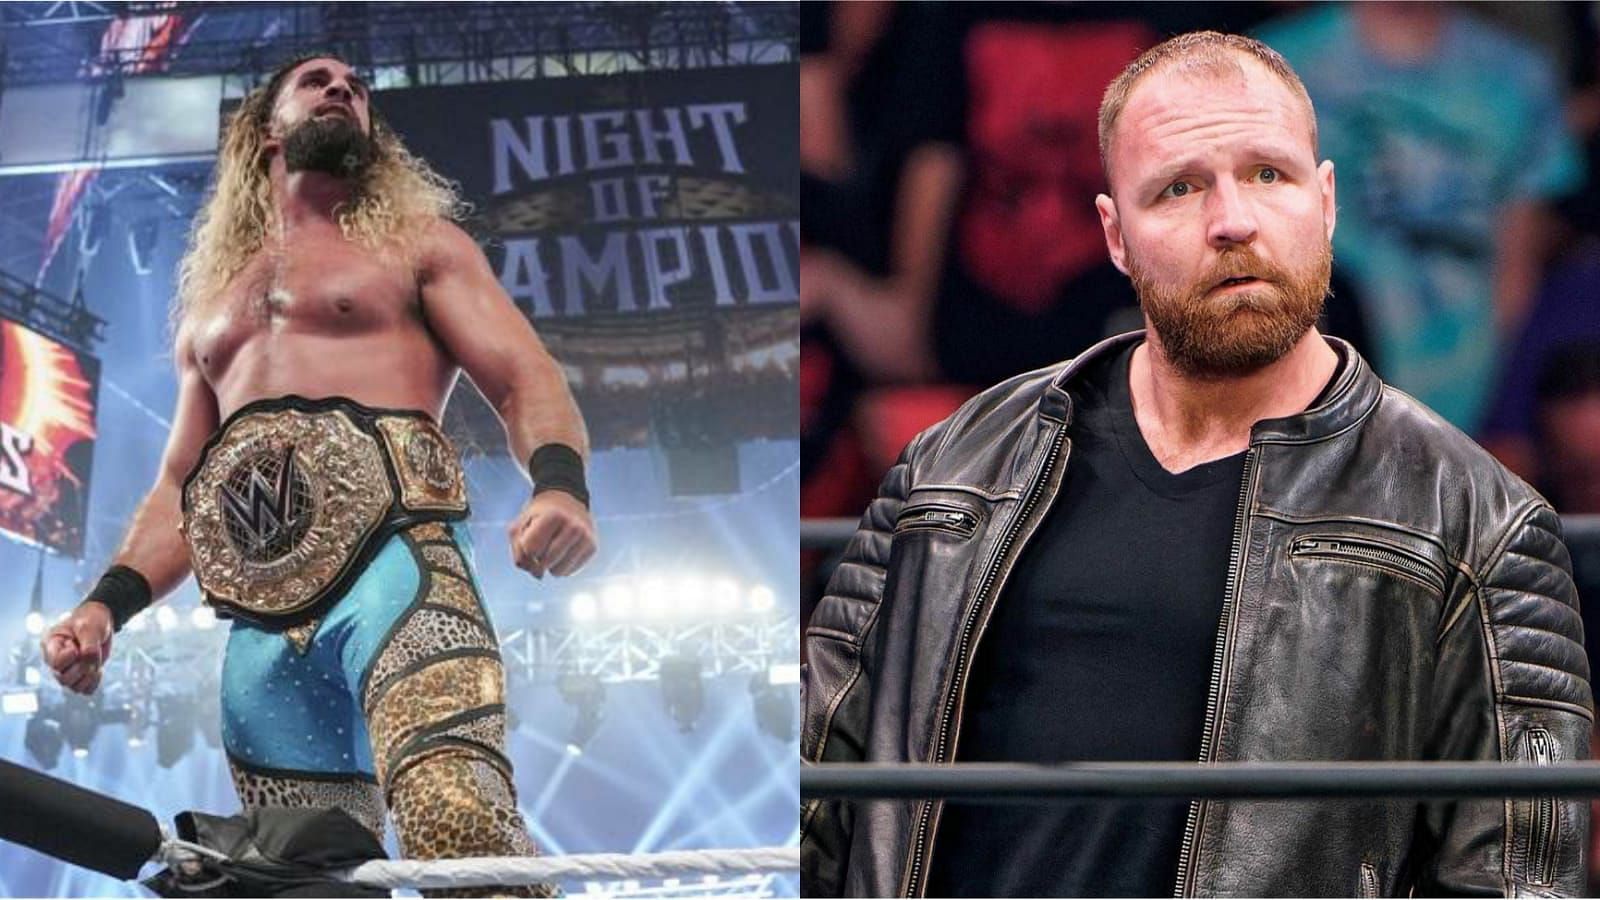 Seth Rollins (left) and Jon Moxley (right)